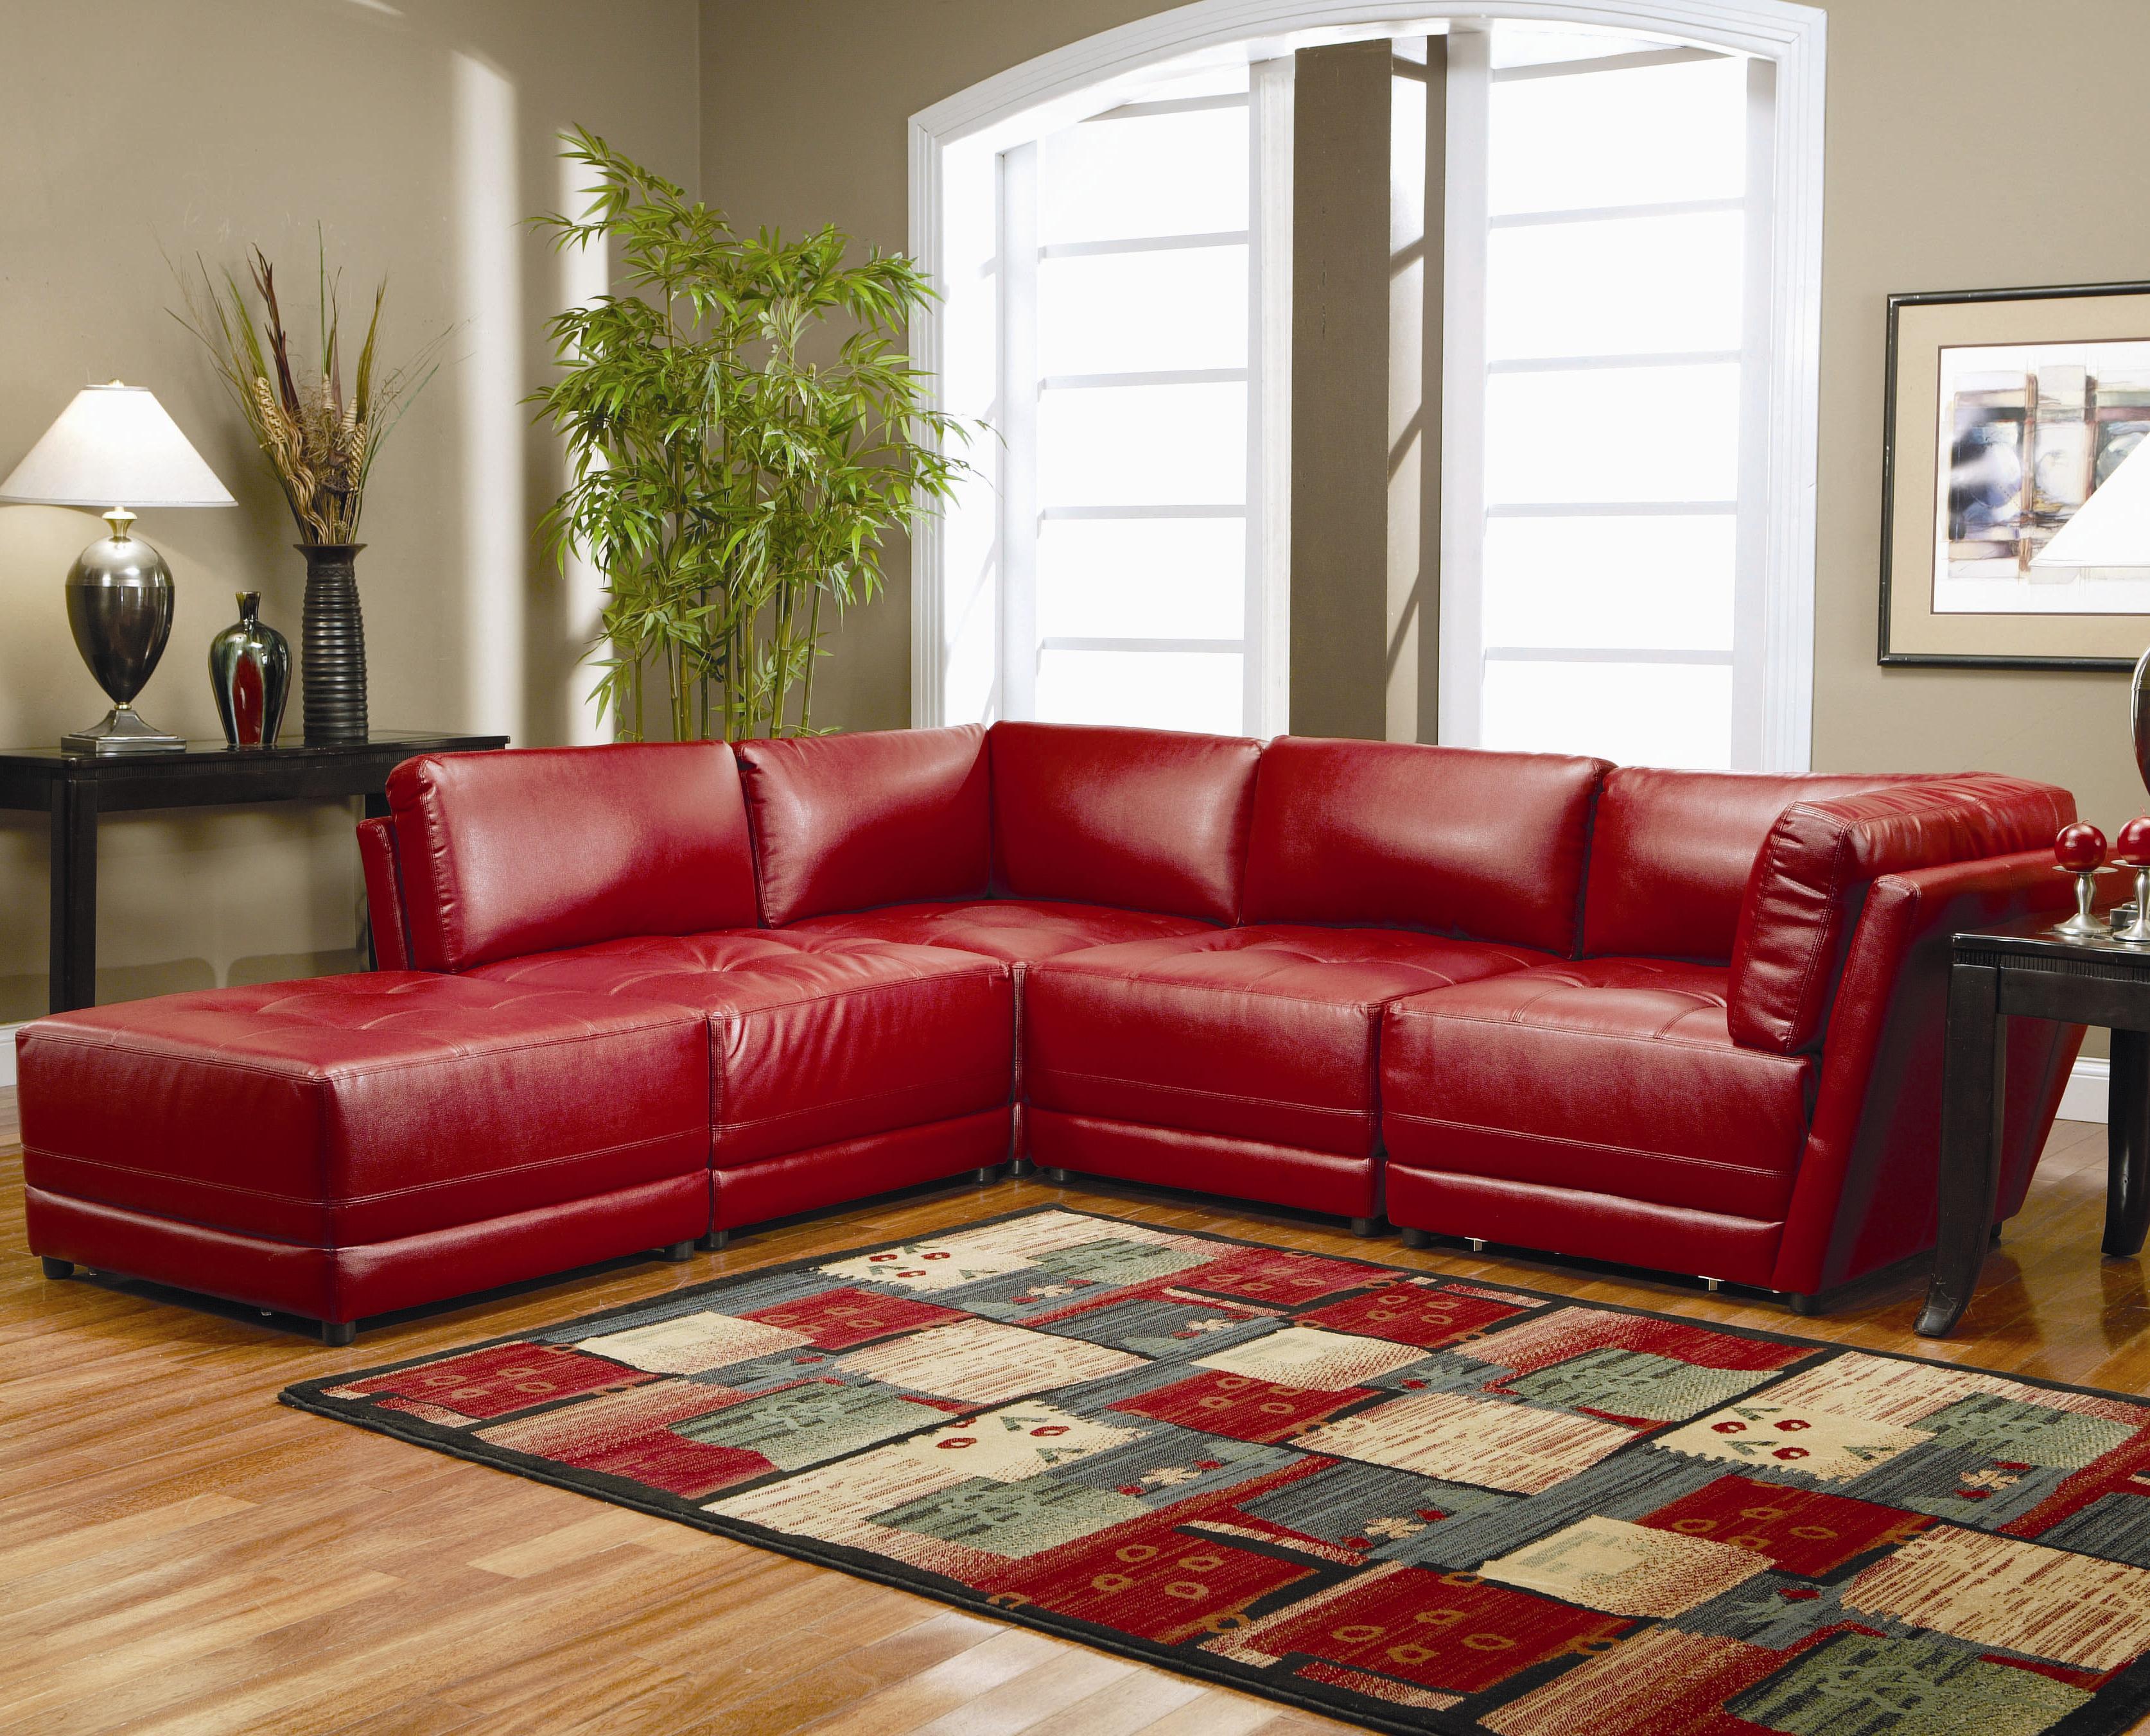 Red Painted Living Room And Cozy Furniture